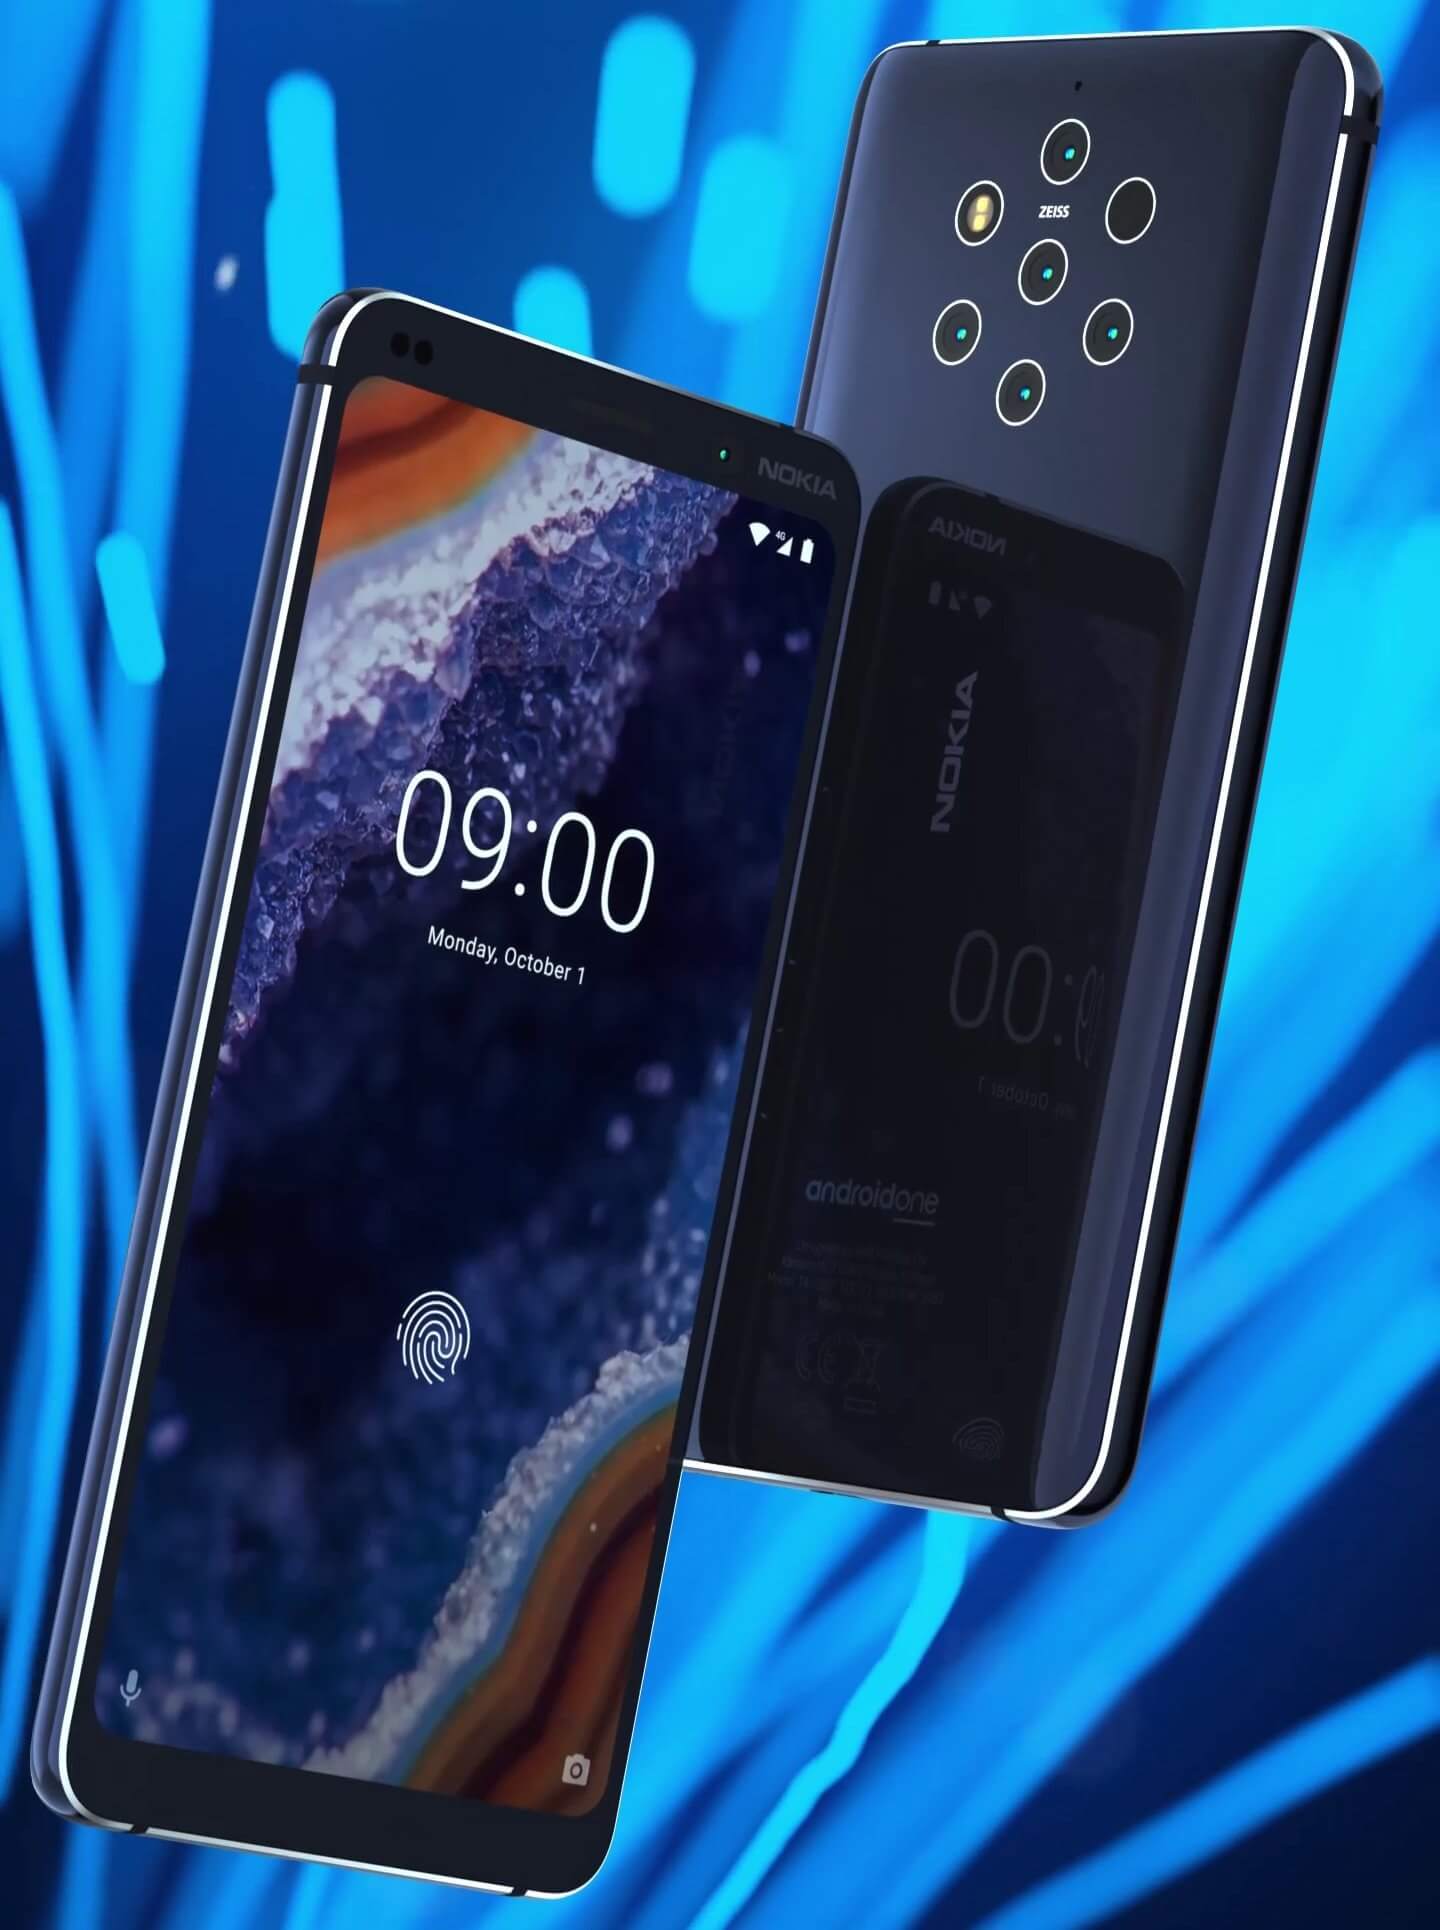 Leaked press render and video show off Nokia 9 PureView's five rear cameras